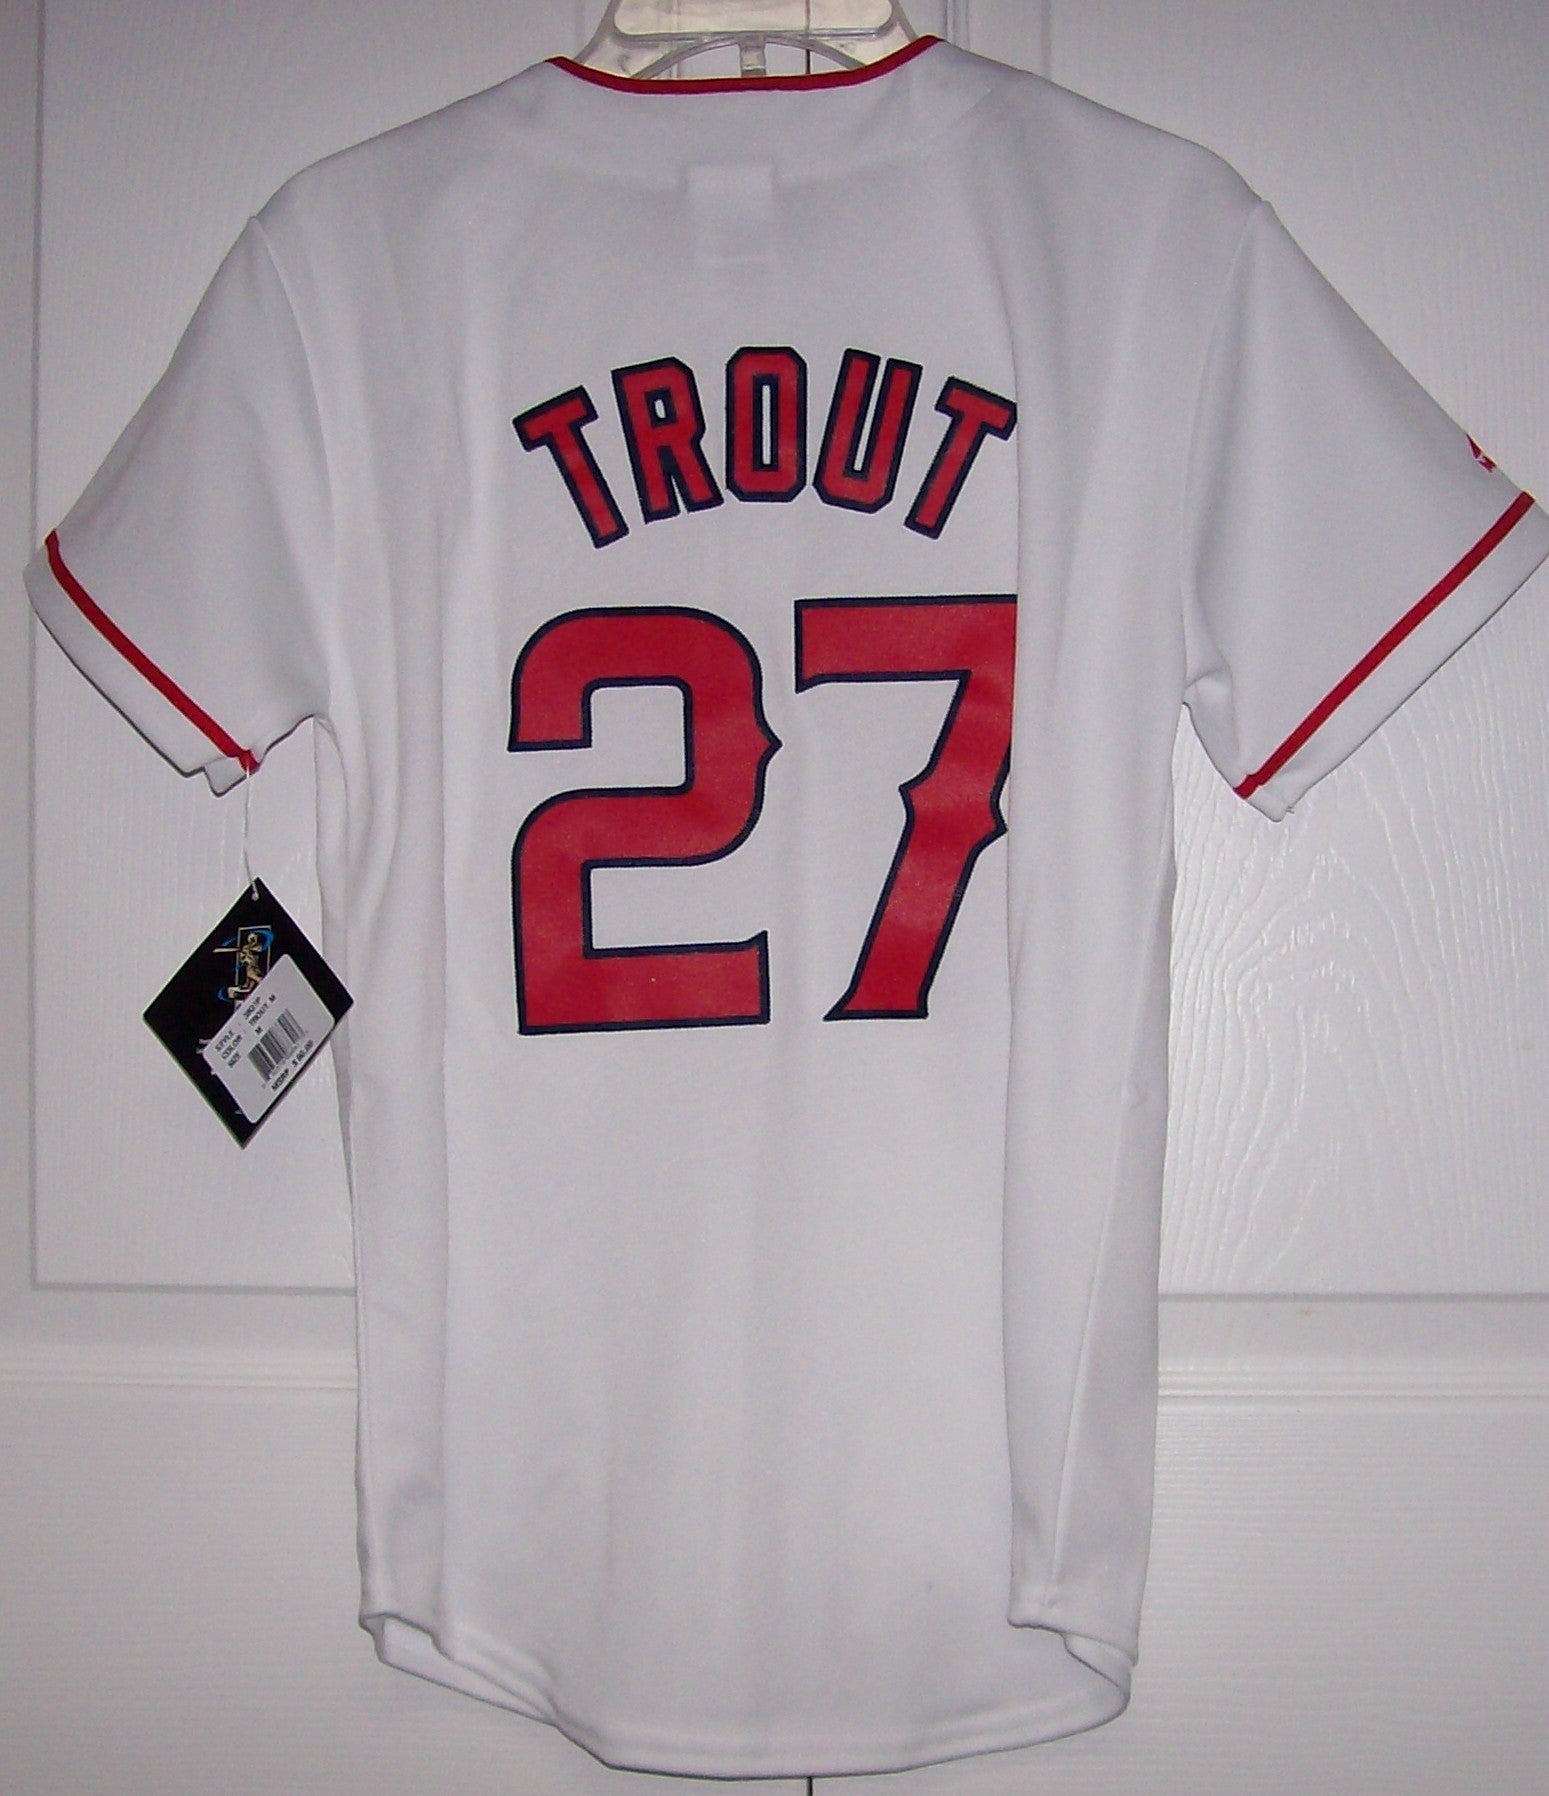 Brand New Los Angeles Angels Mike Trout Jersey With Tags - Size Men's XL